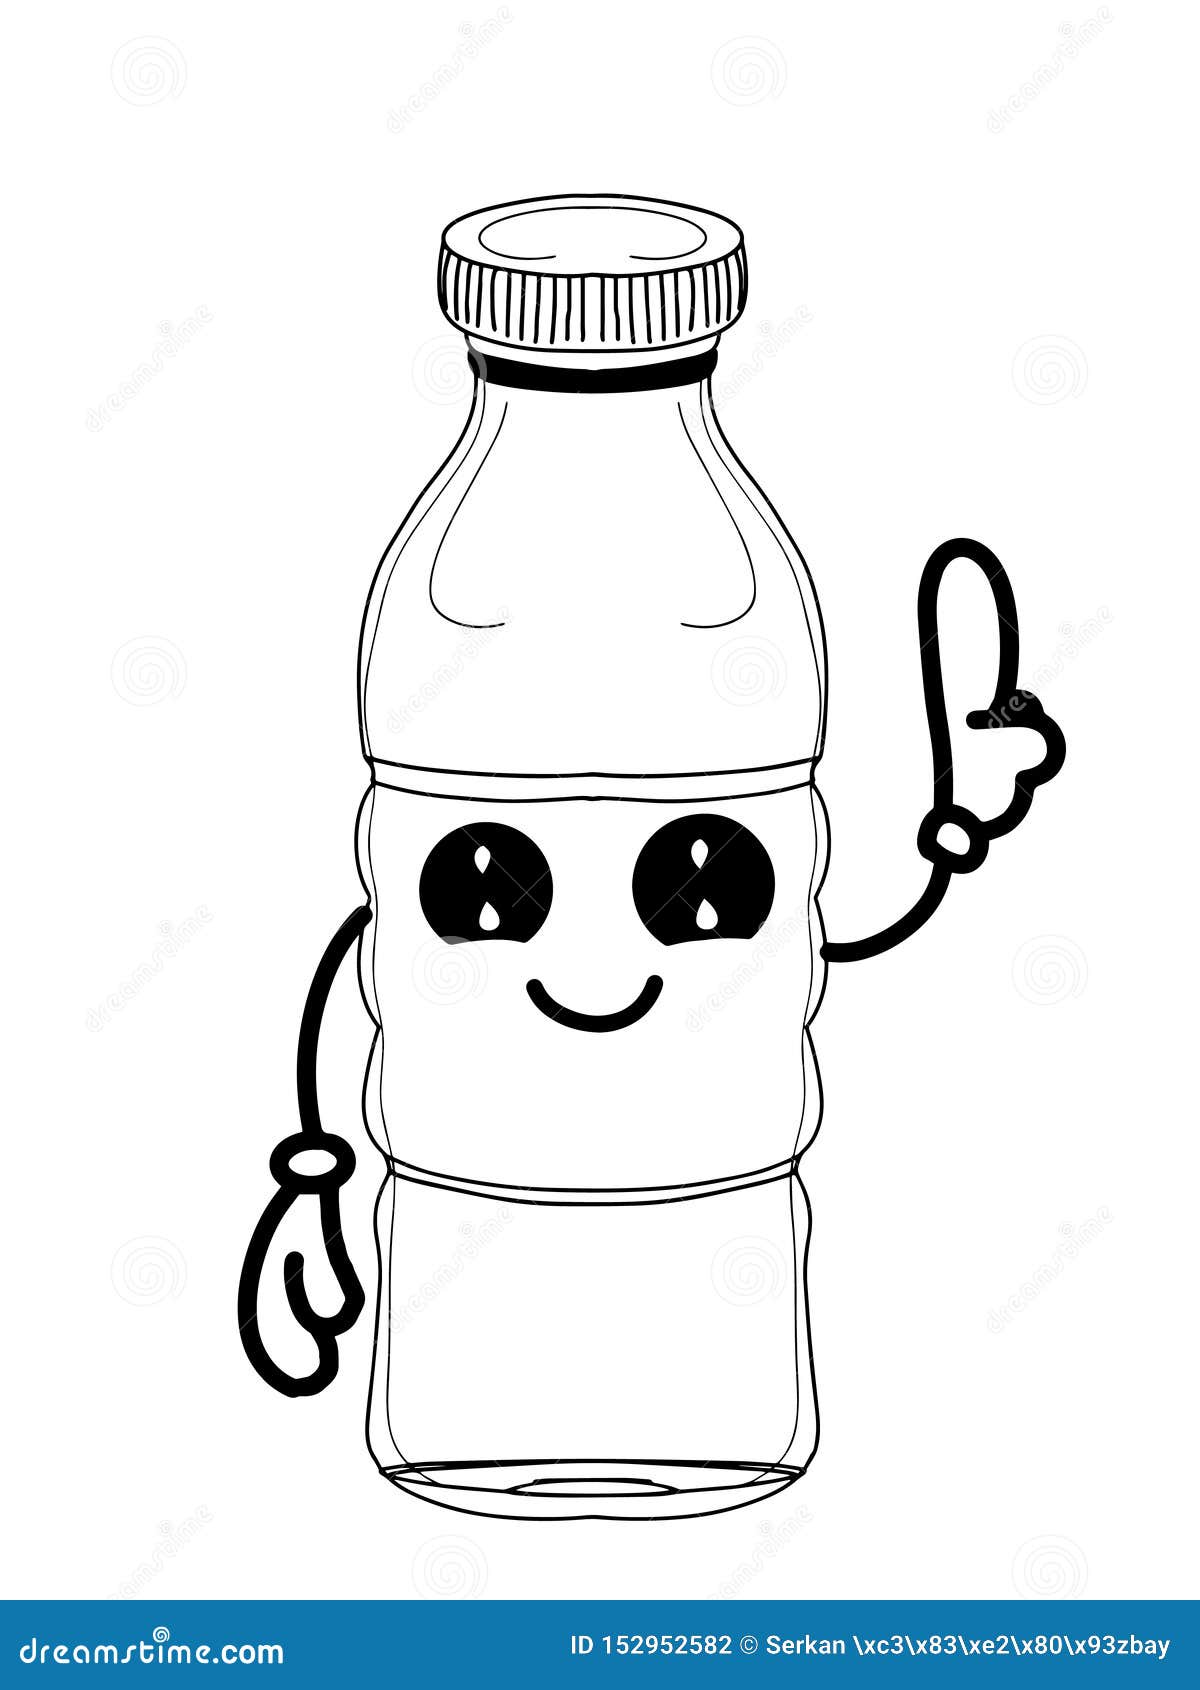 Glass bottle with cork and liquid sketch doodle Vector Image